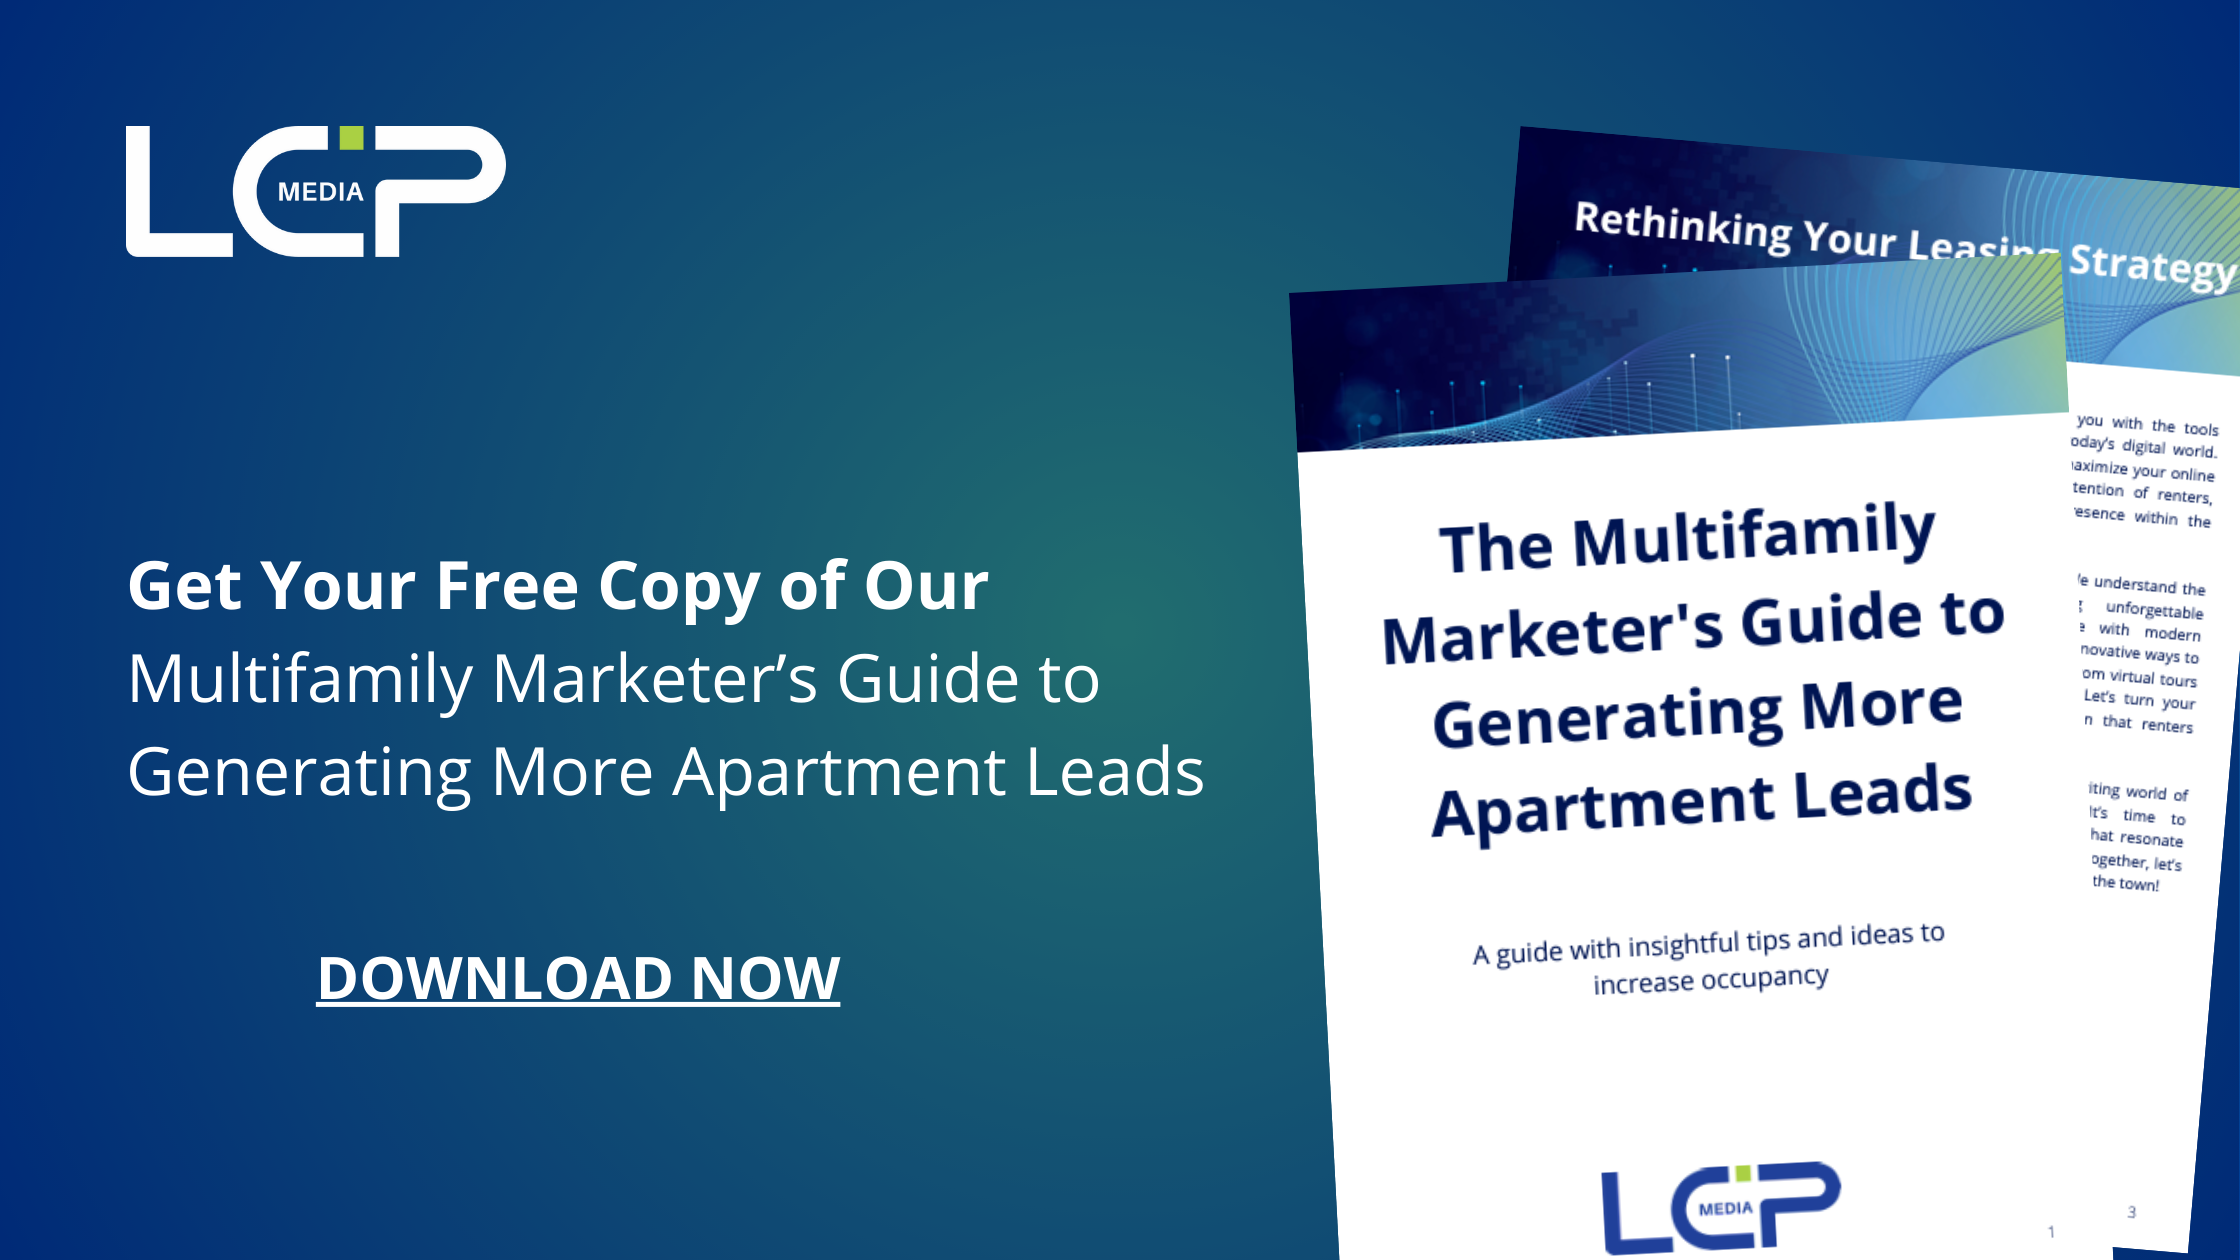 The Multifamily Marketers Guide to Generating More Apartment Leads